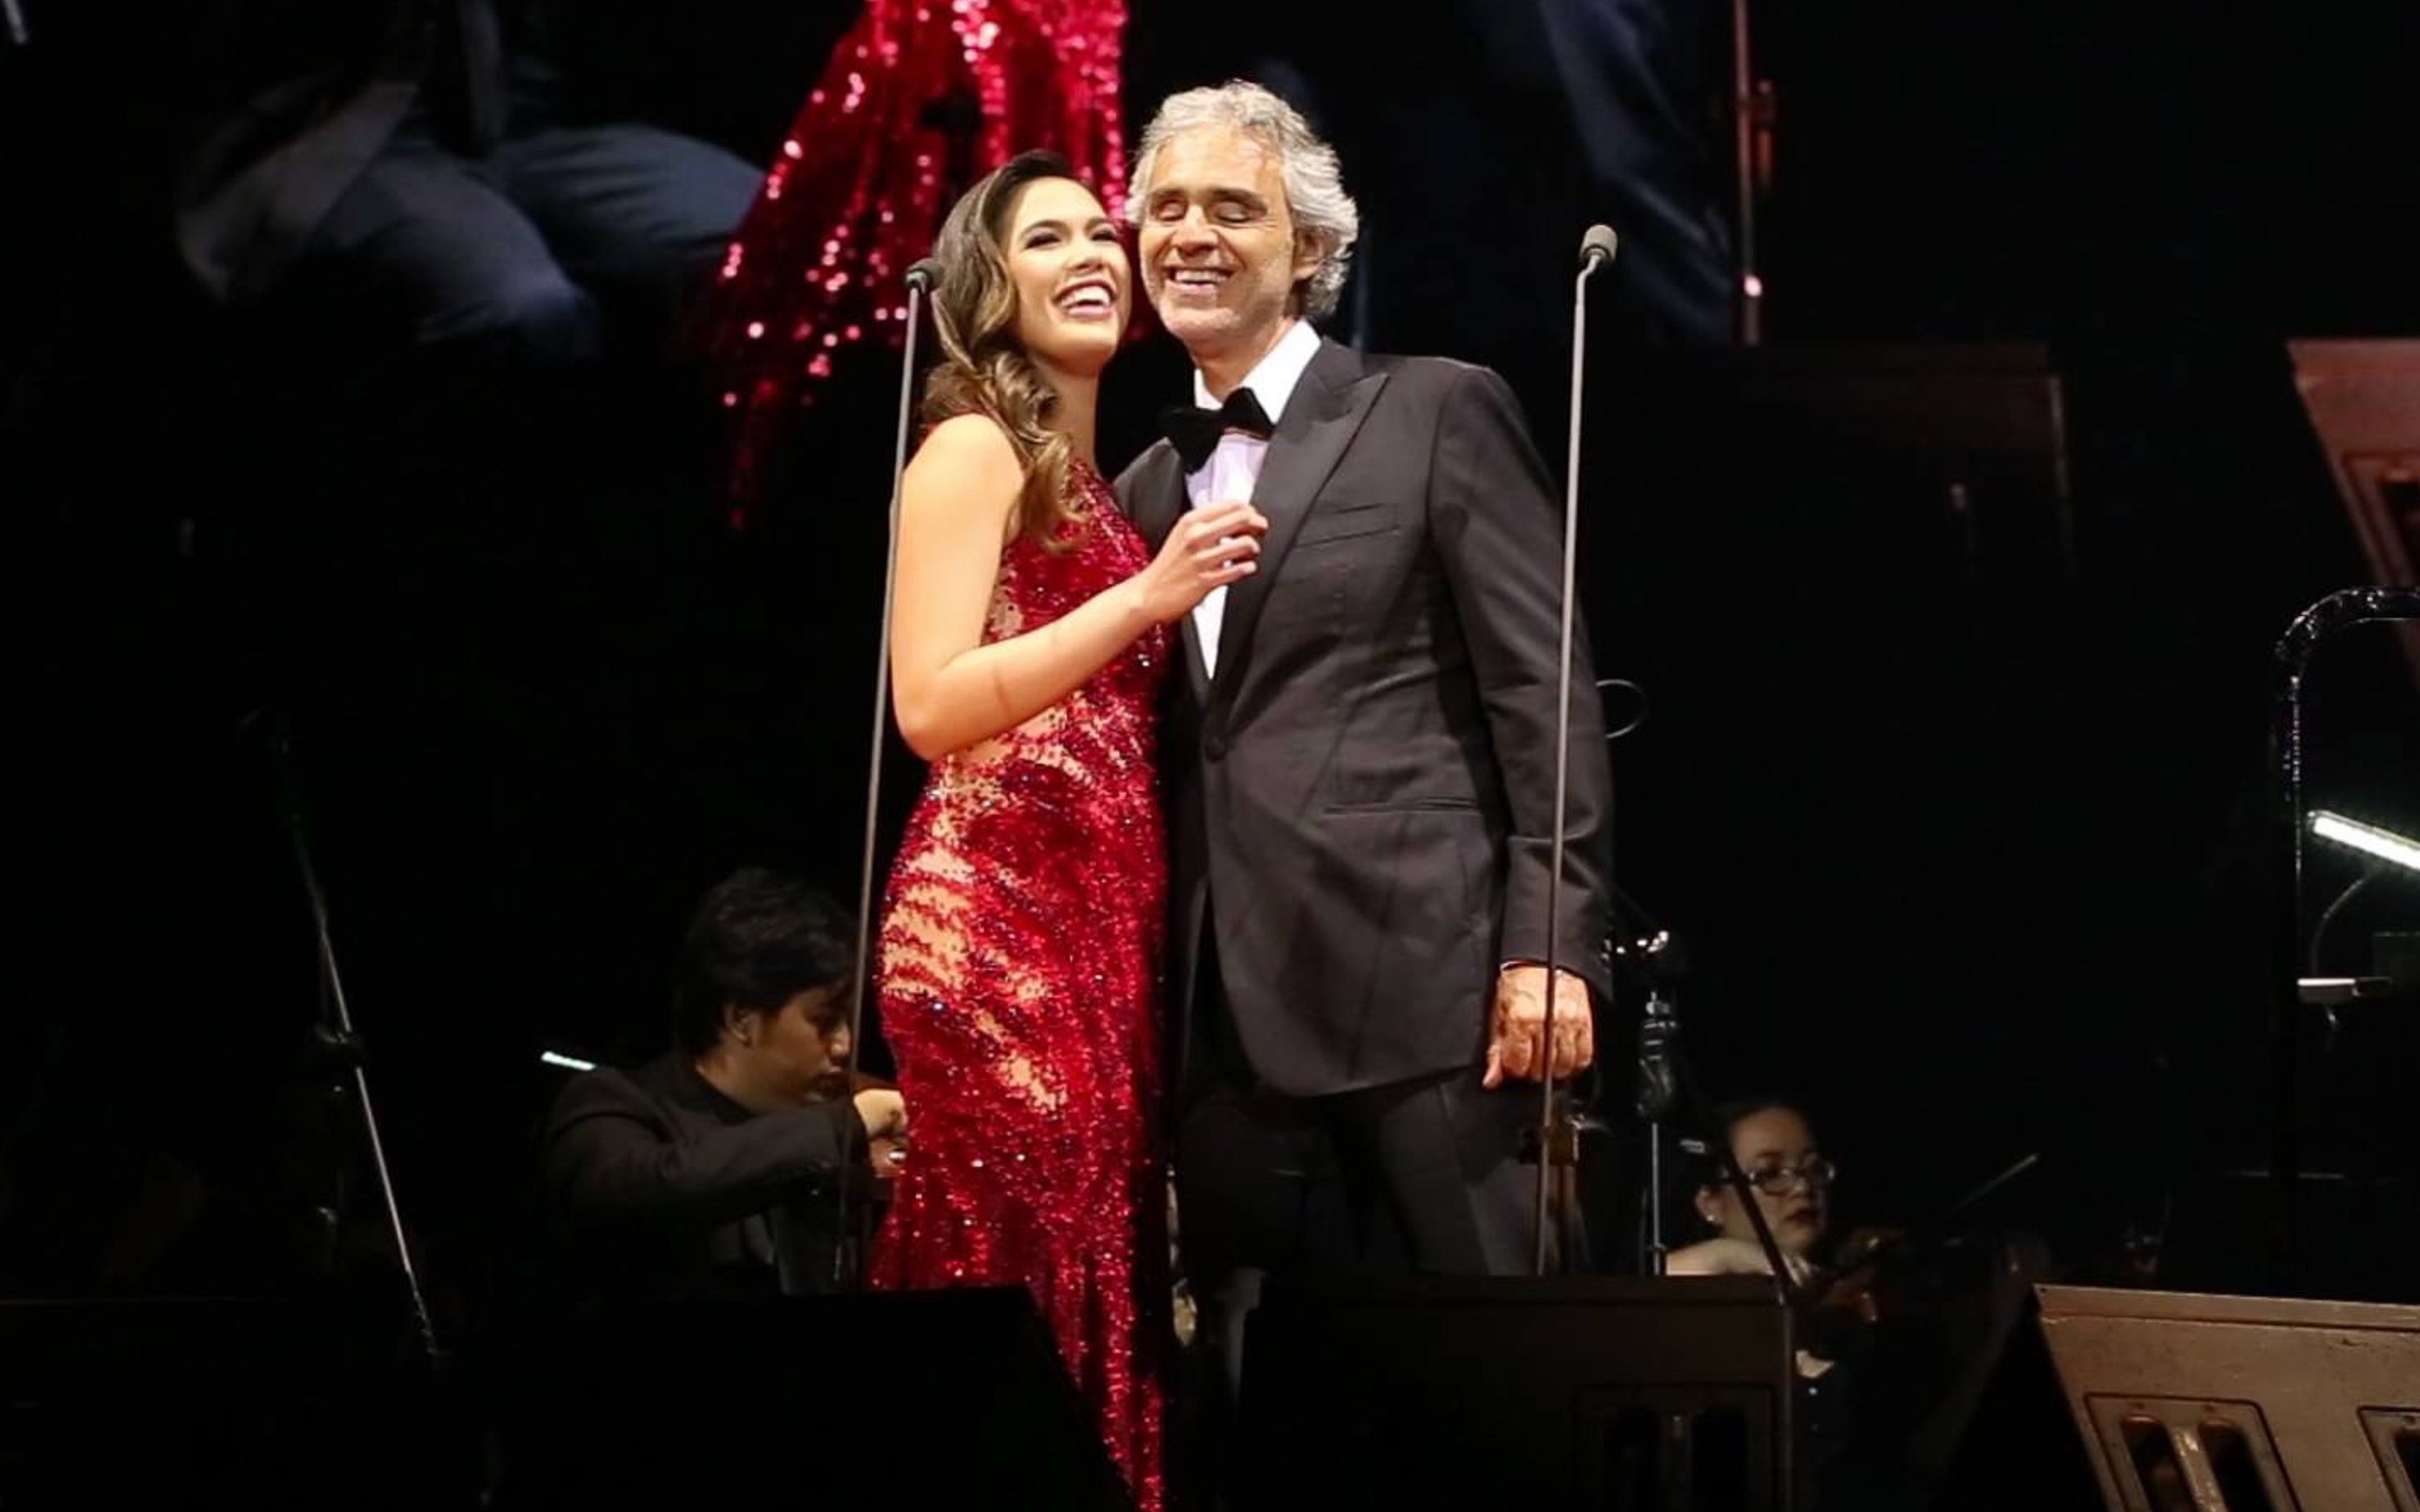 'CHEEK TO CHEEK.' Christine Allado and Andrea Bocelli share a cute moment after they perform a duet of his song 'Cheek to Cheek' at his Manila concert. Photo by Photo by Roberto Vivancos Studio www.robertovivancos.com 